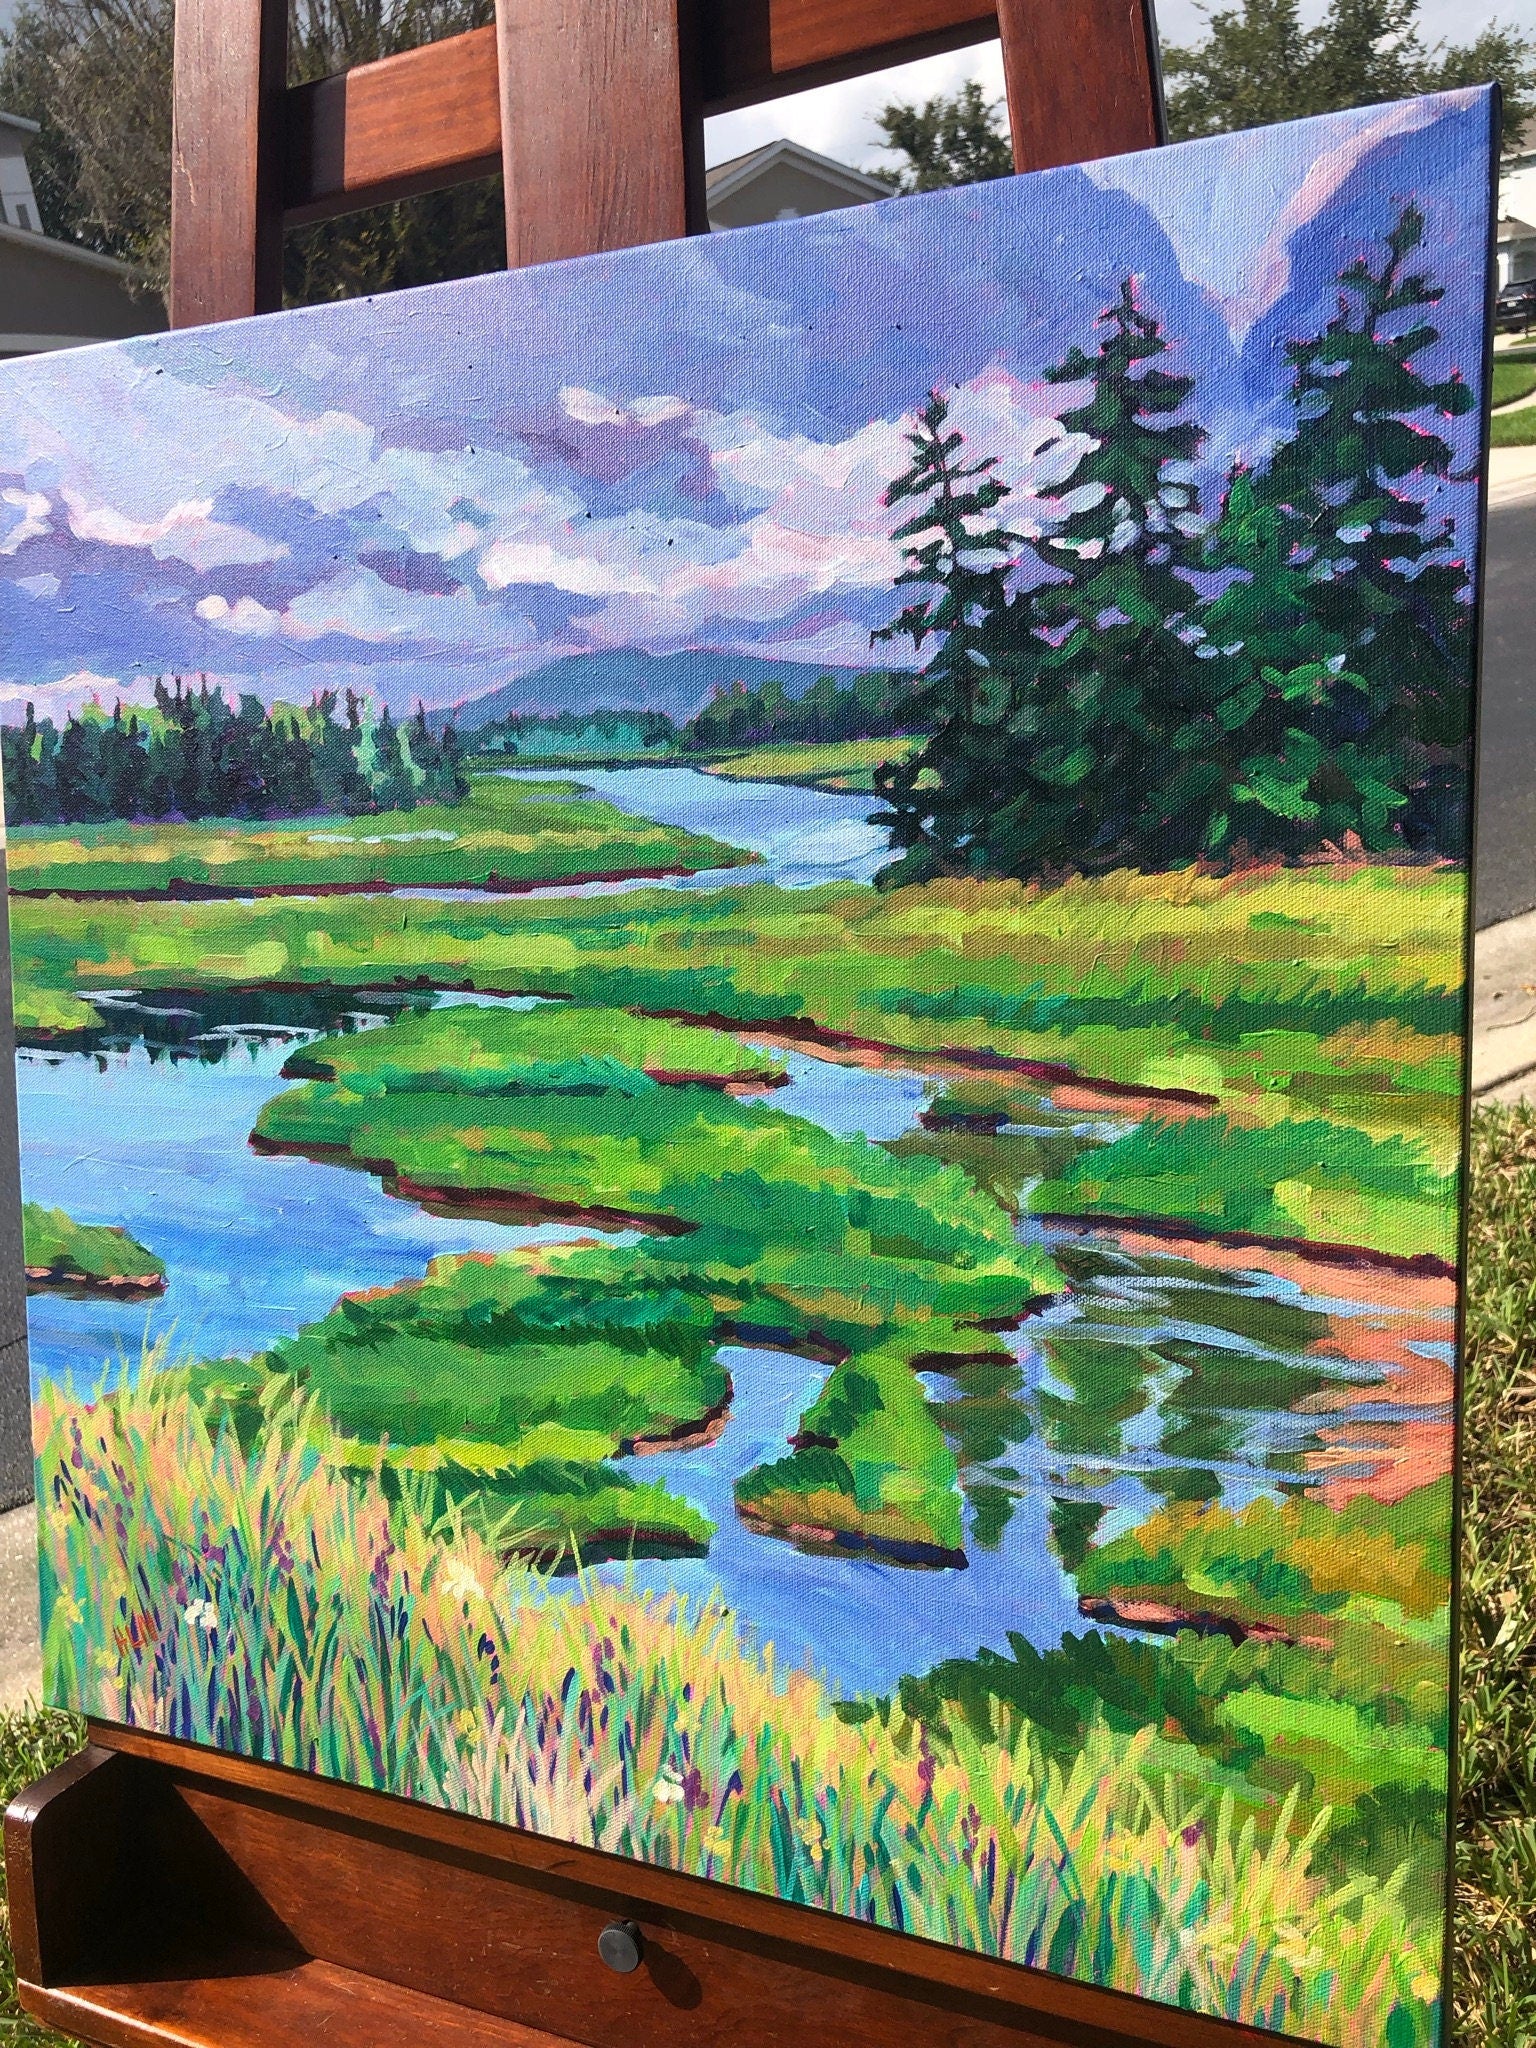 painting on easel outside: 20x20 painterly original painting of Wetlands on Mount Desert Island Maine with dramatic sky and evergreen trees. 